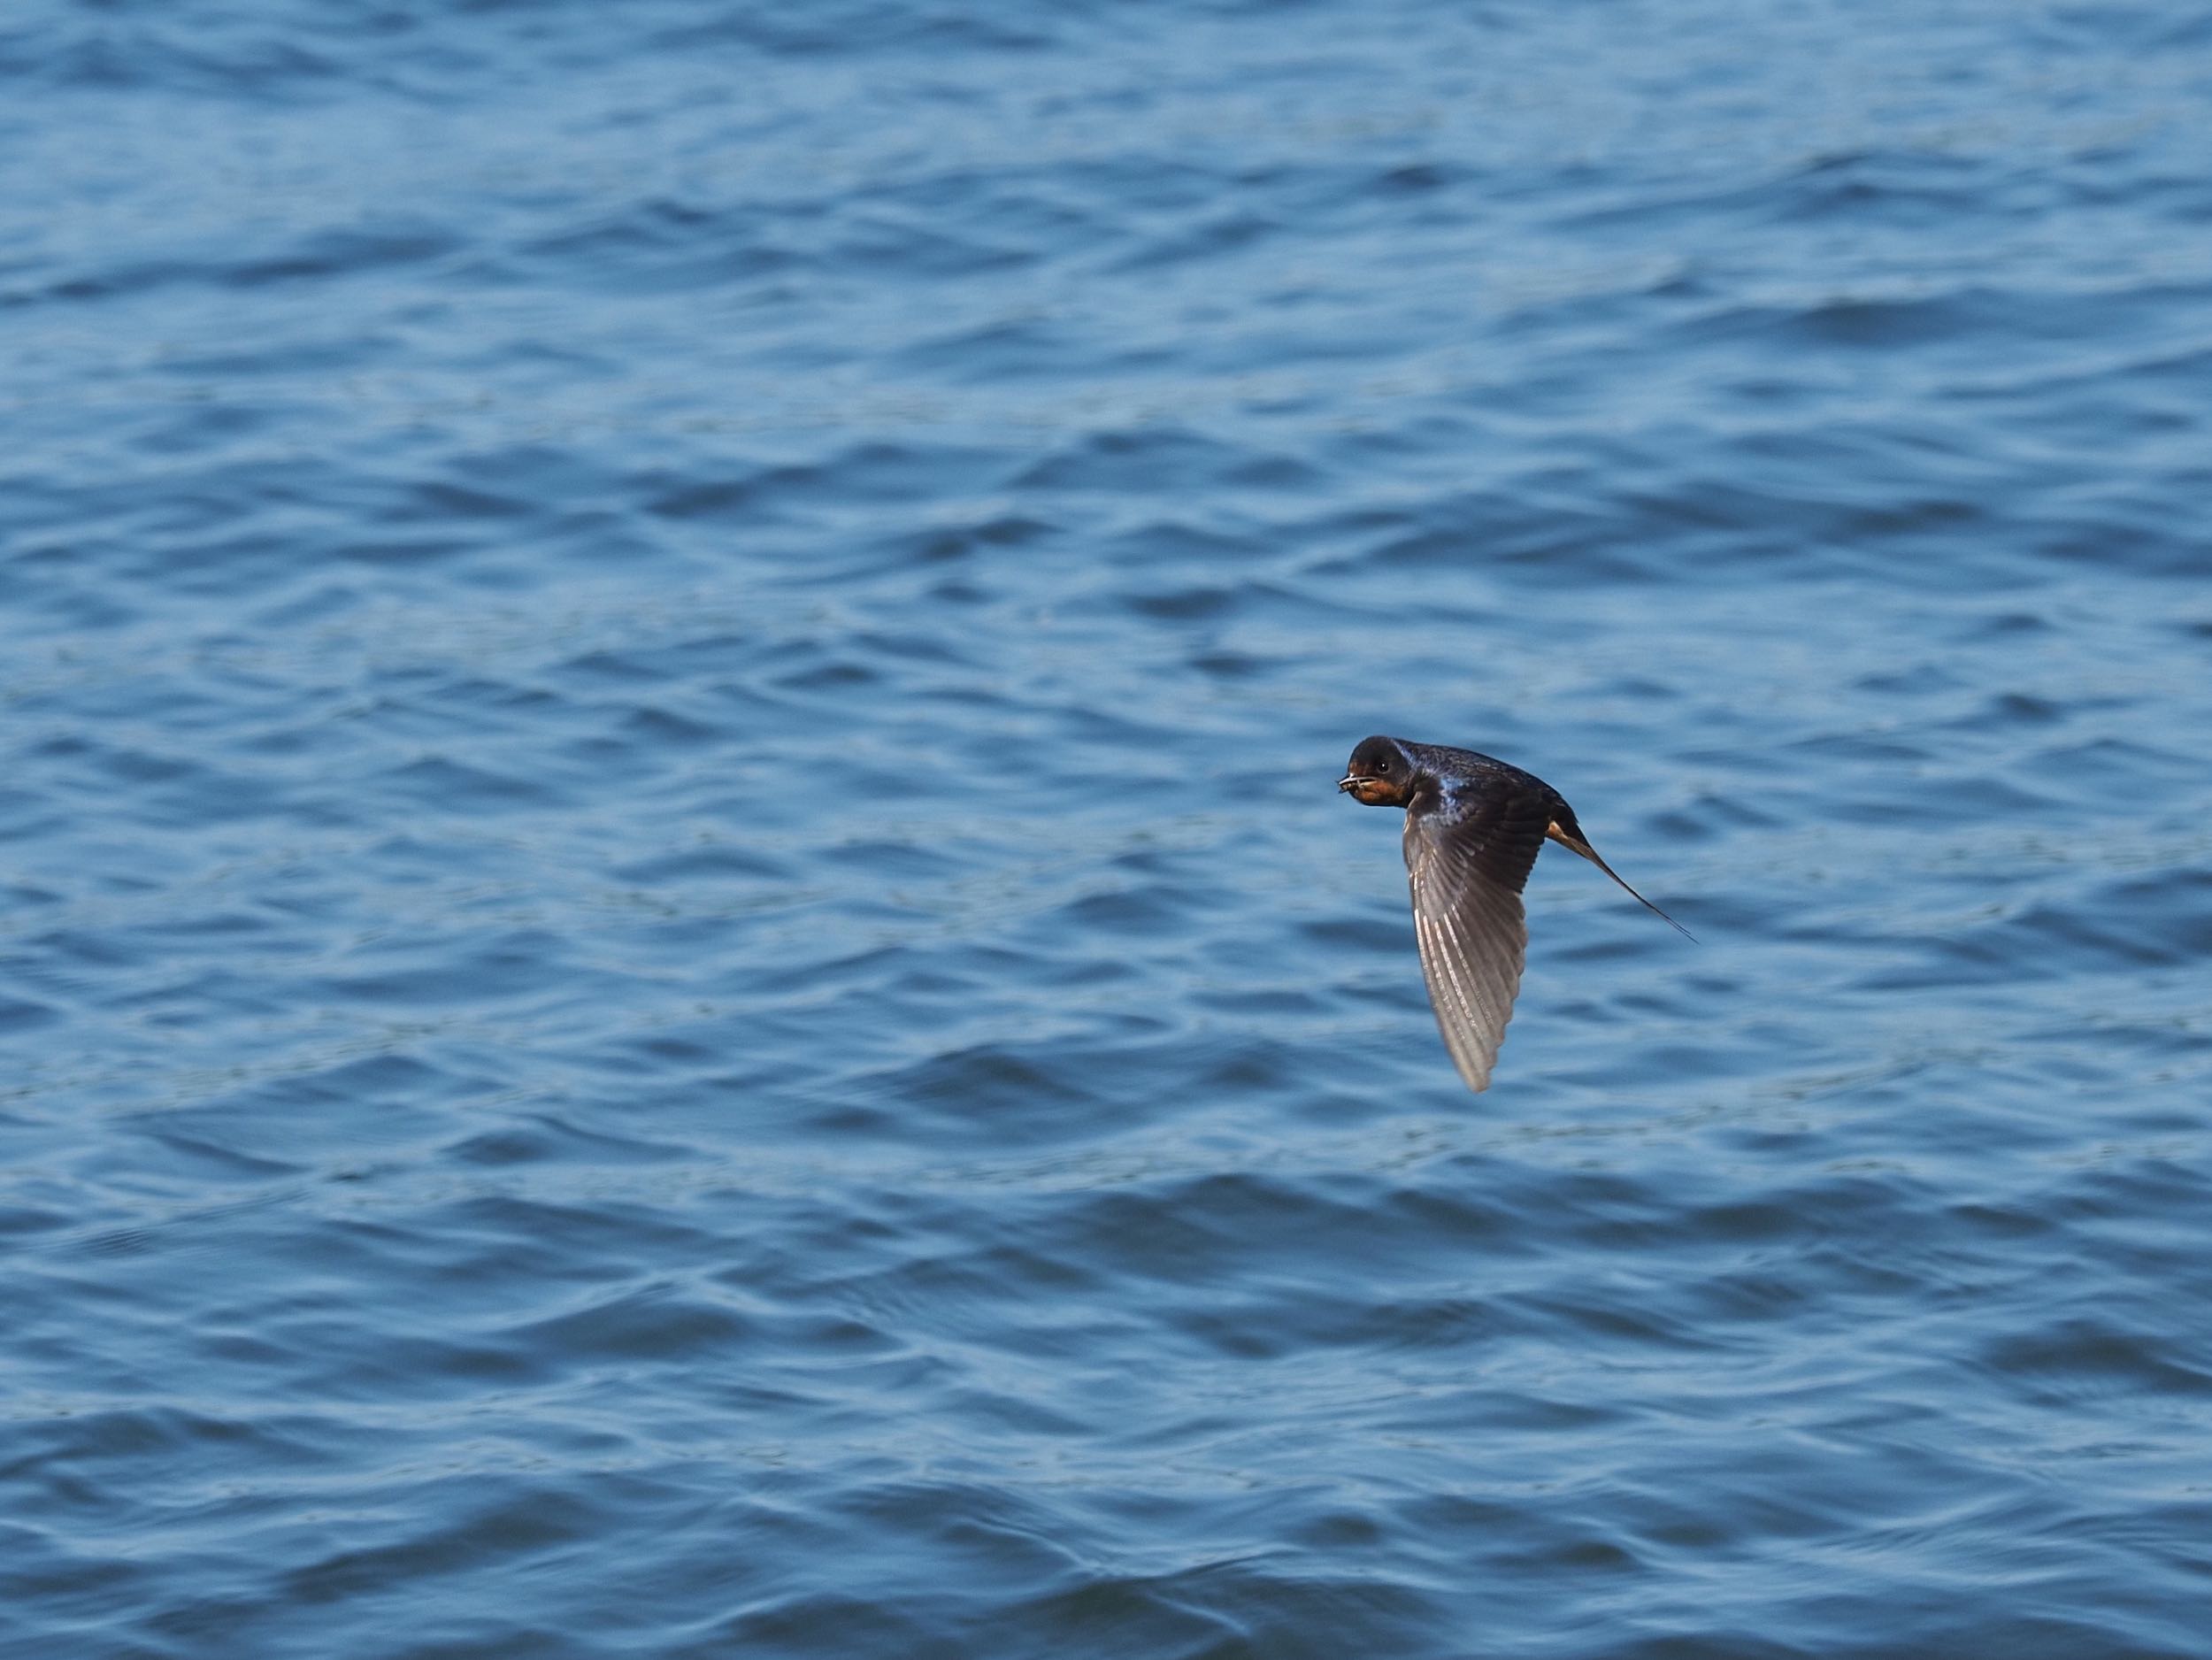 A Barn Swallow with a fly in its beak in flight over Cayuga Lake